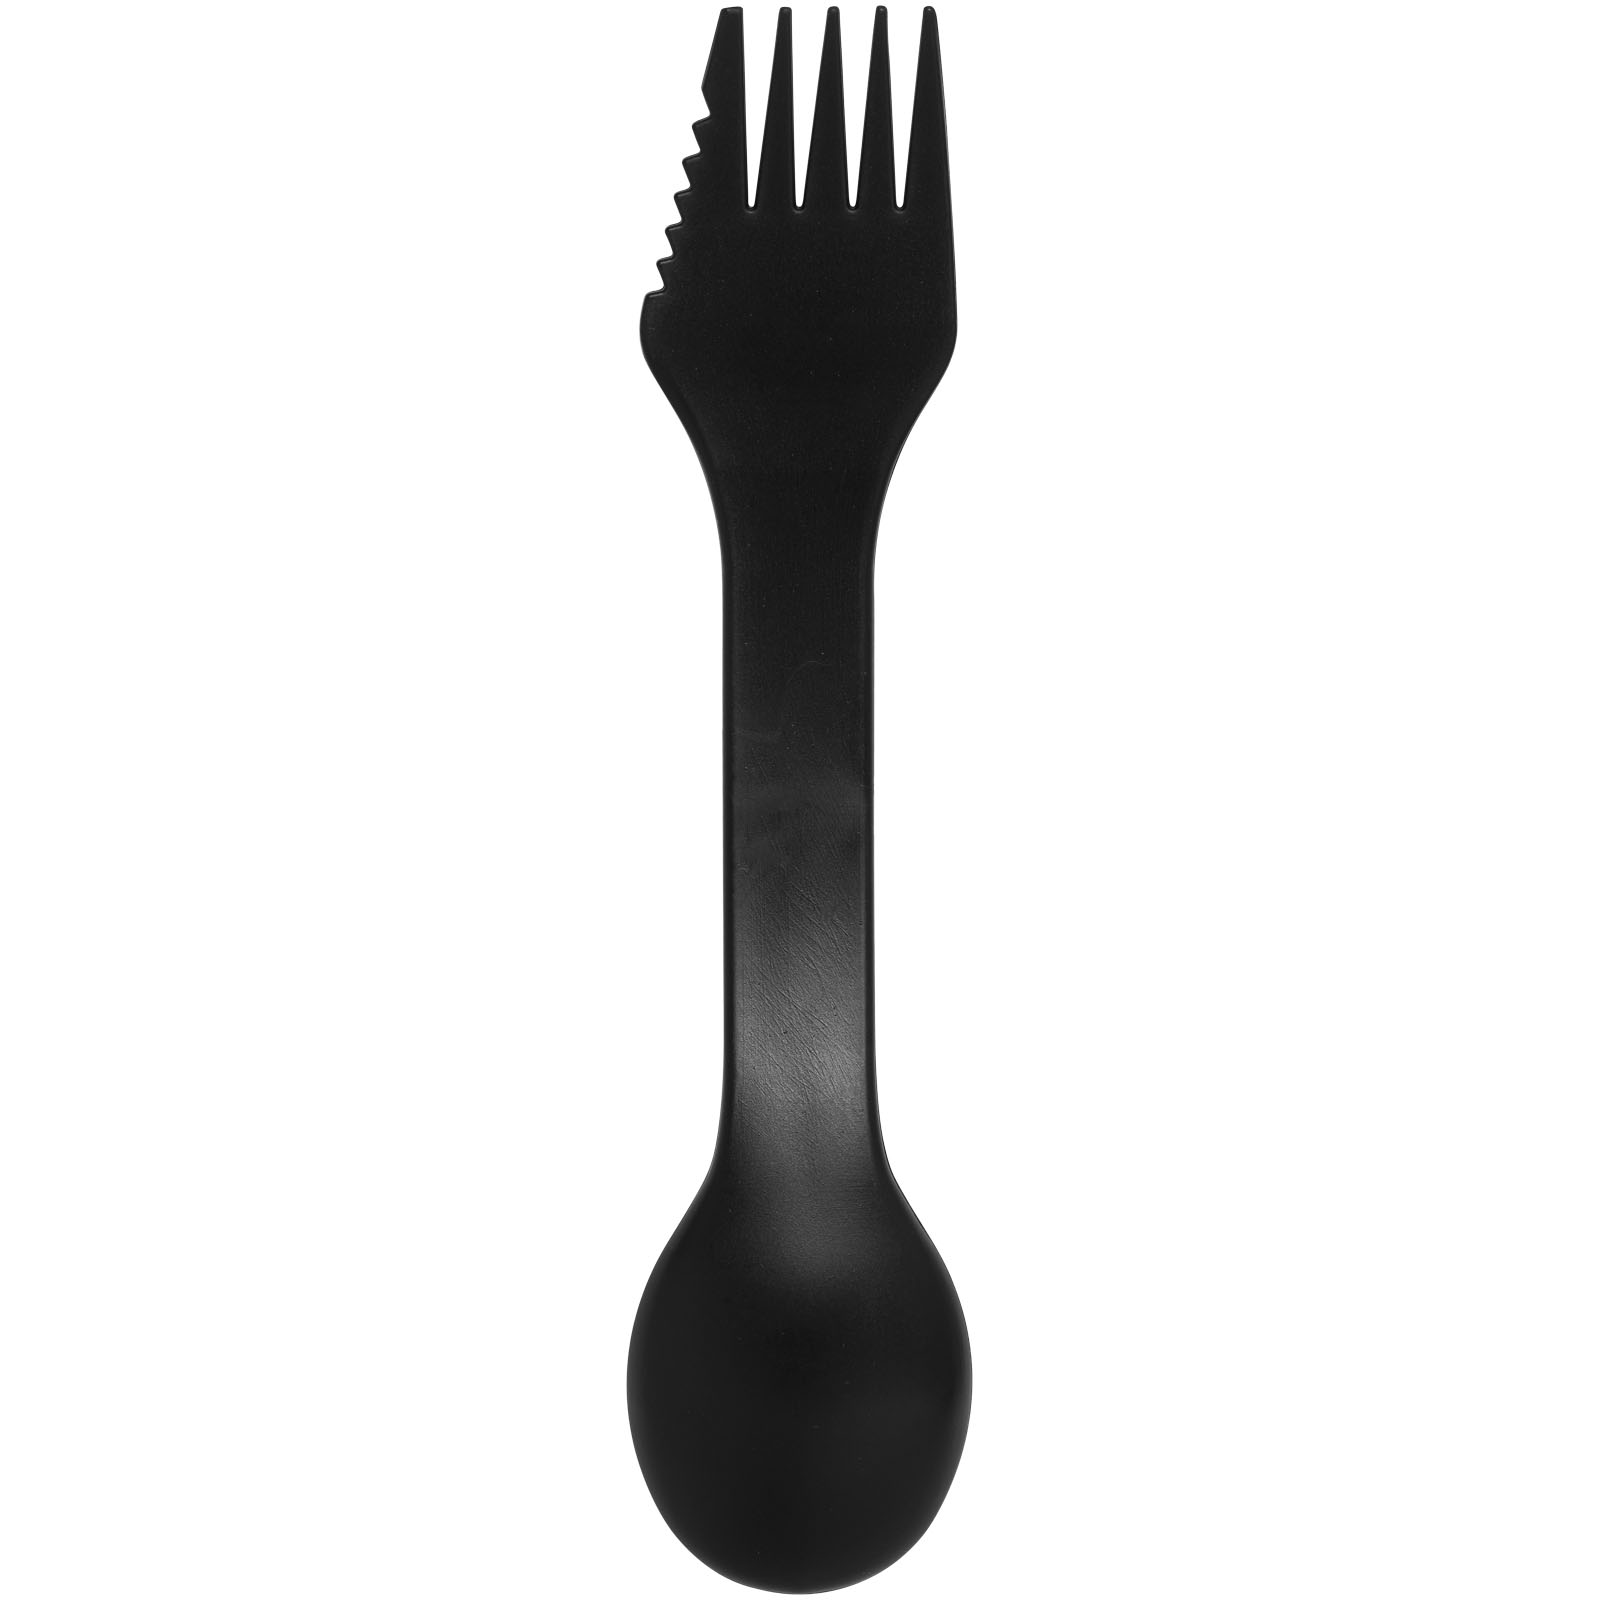 Advertising Kitchenware - Epsy 3-in-1 spoon, fork, and knife - 2